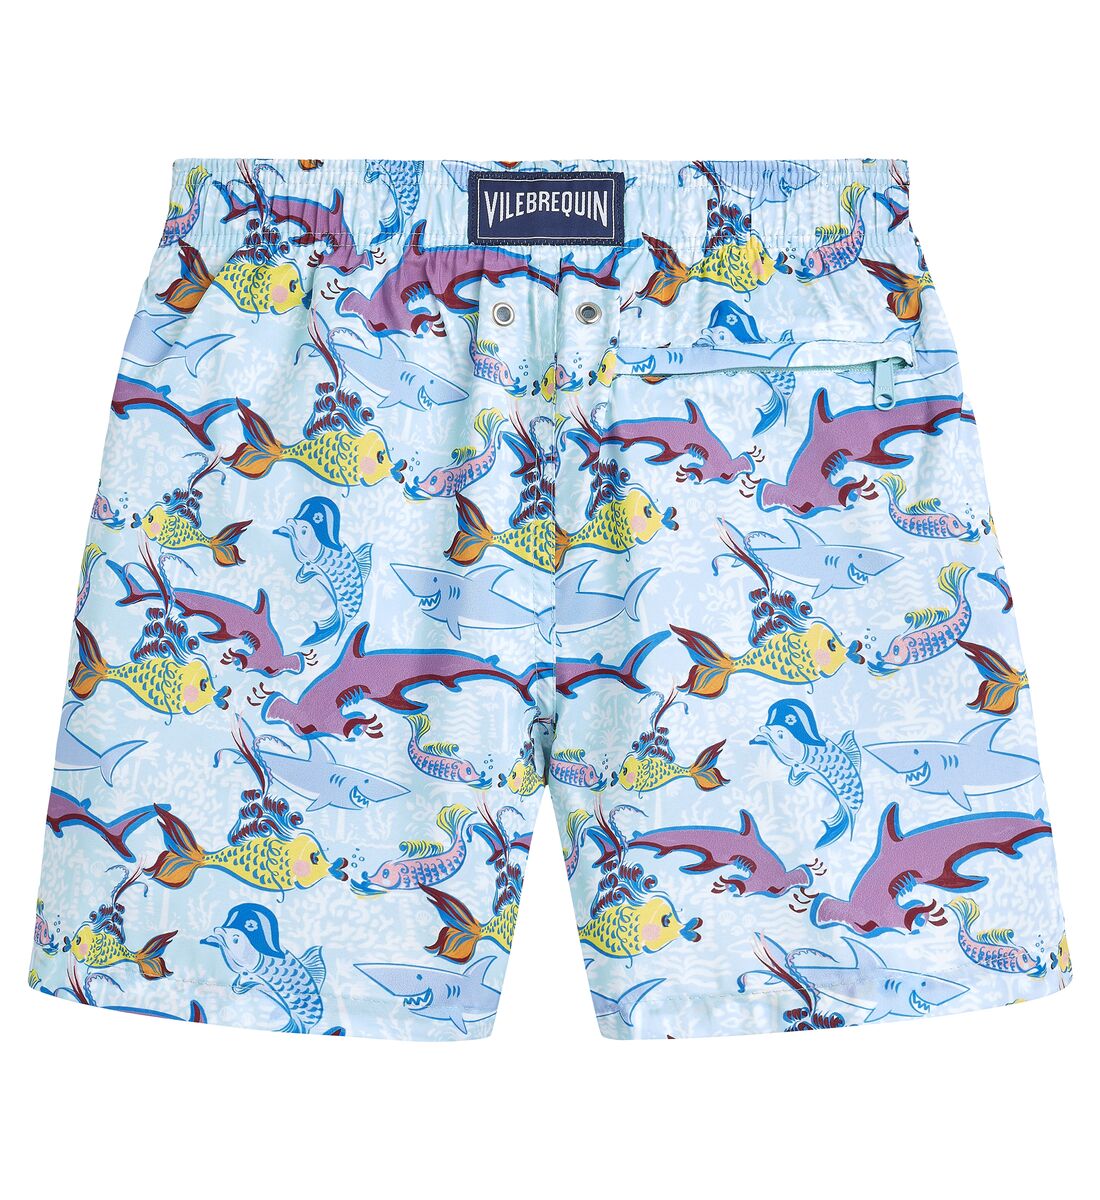 Boys Ultra-Light and Packable Swim Trunks French History